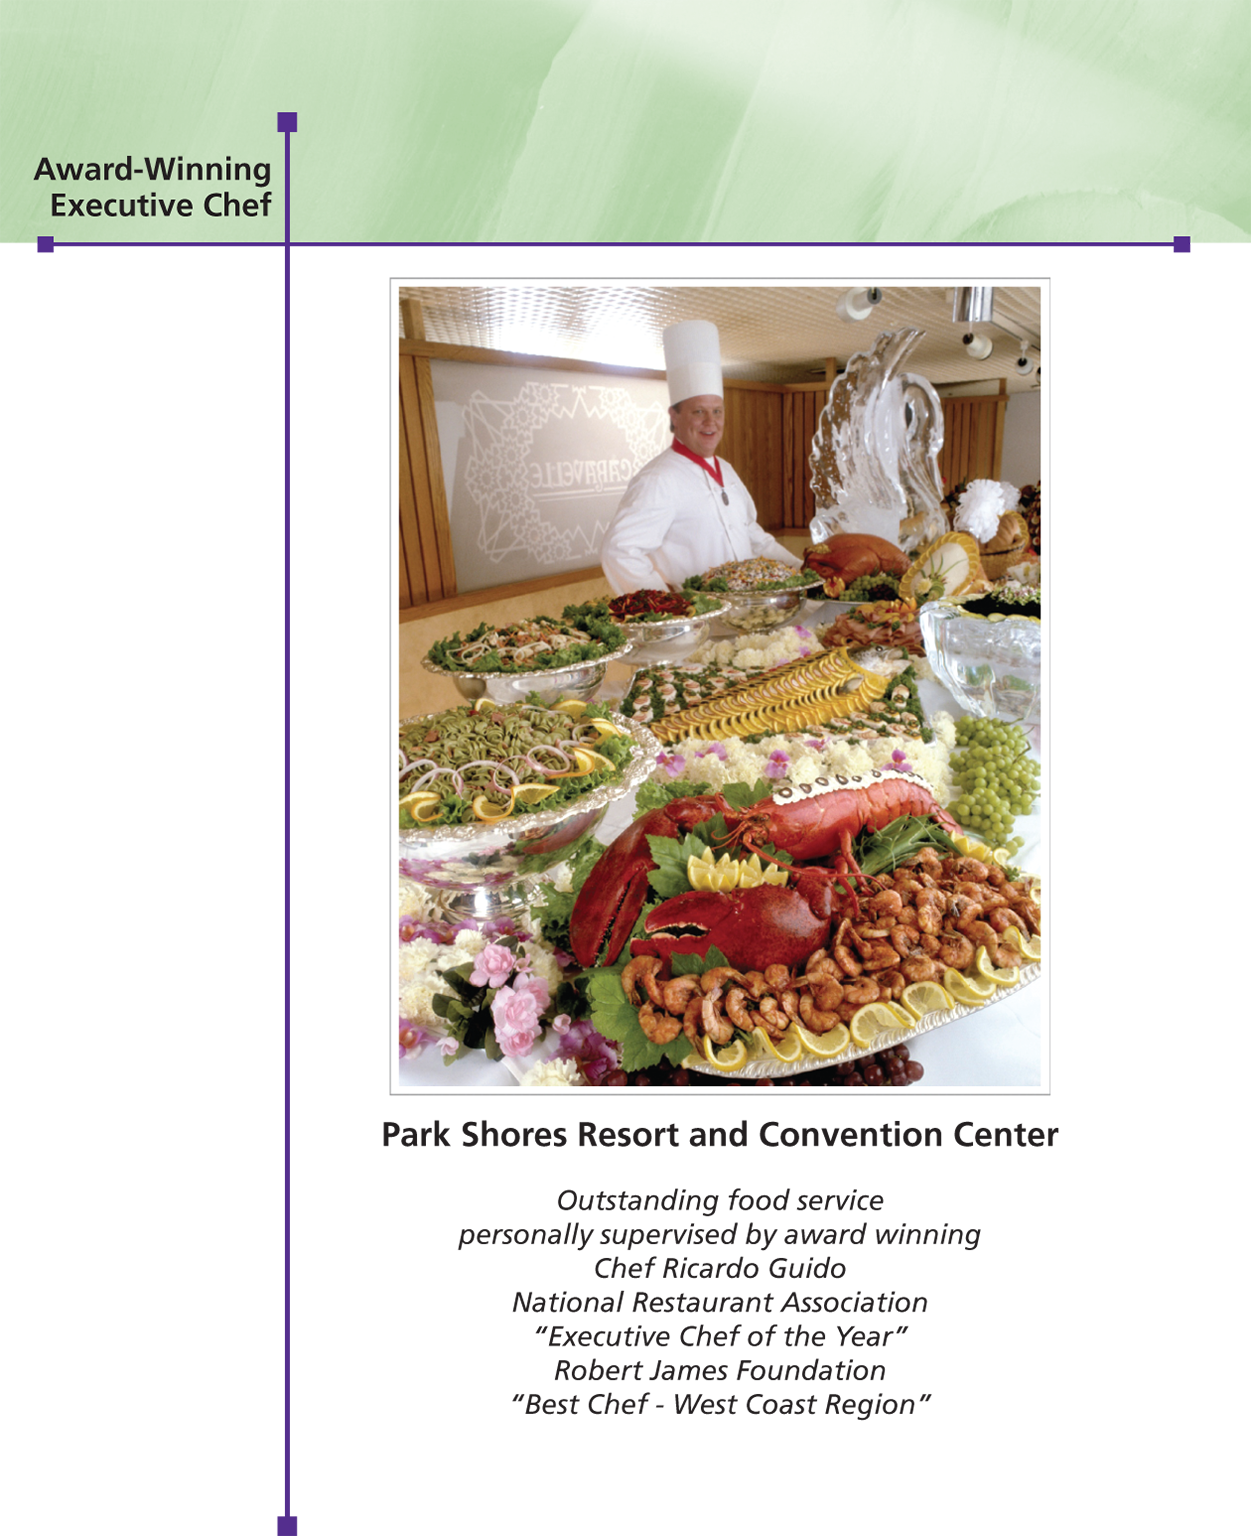 A page titled “Award-Winning; Executive Chef” shows a photo and a text below it.